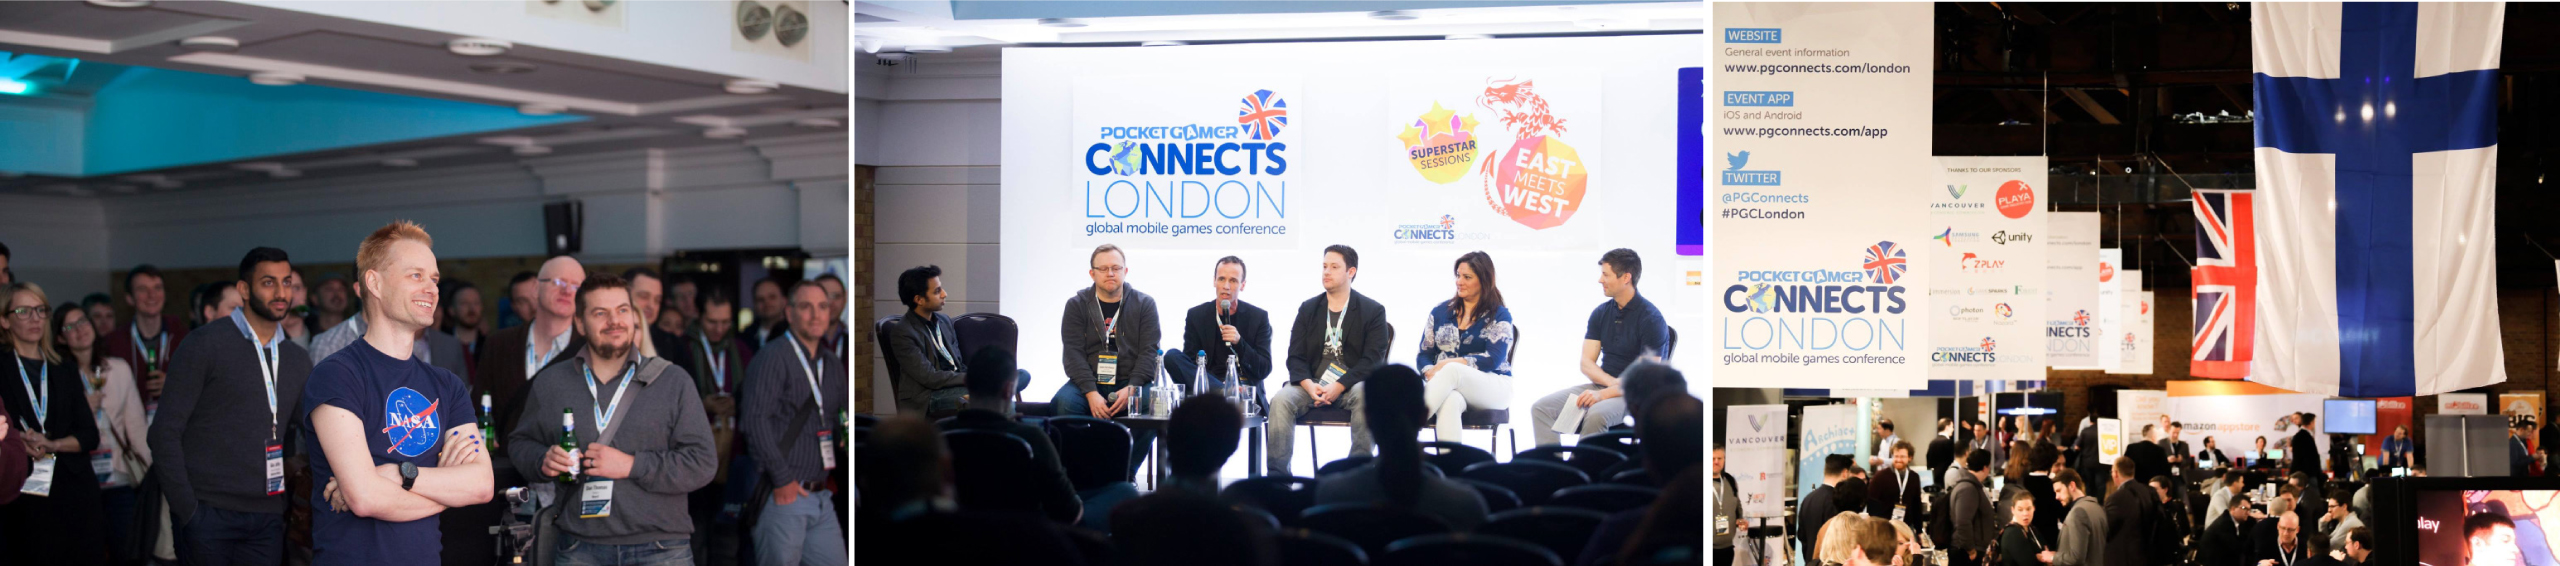 Back for 2019, the Level Up: Vancouver, British Columbia pavilion, jointly organized by the Province of British Columbia and the Vancouver Economic Commission, brings together top studios from Vancouver and British Columbia to showcase and network at the PG Connects mobile and VR/AR games conference in London.